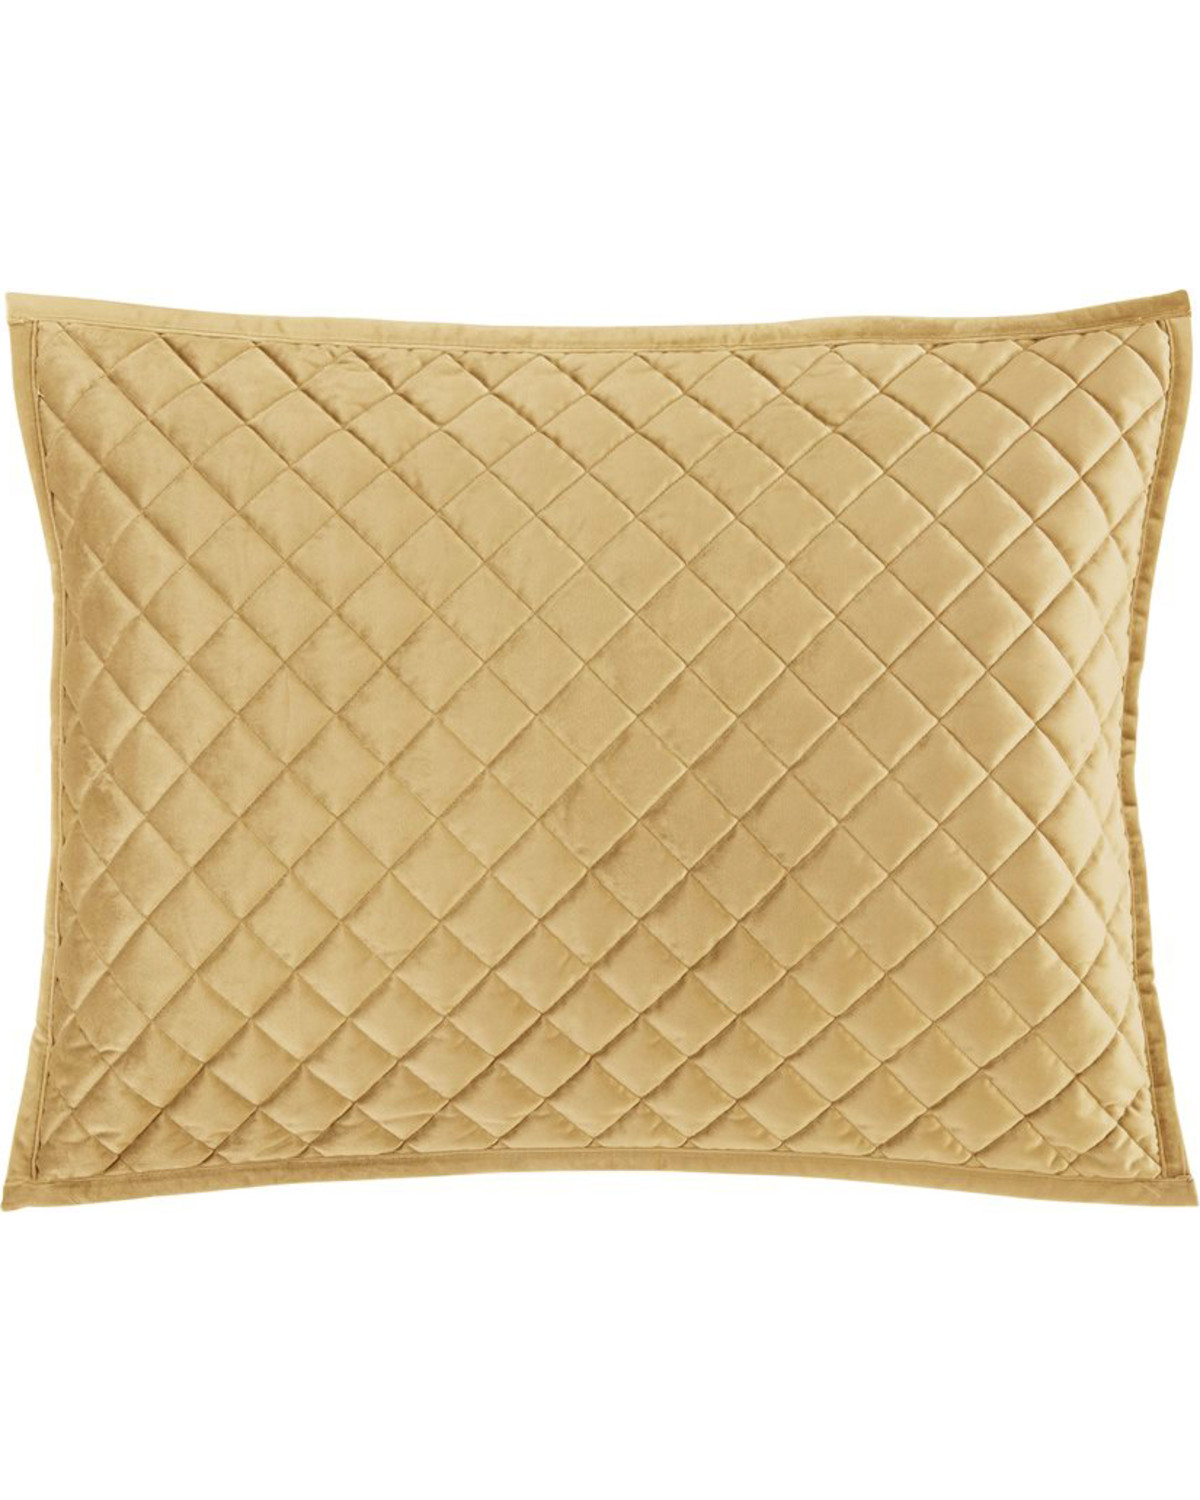 HiEnd Accents Standard Gold Diamond Quilted Shams